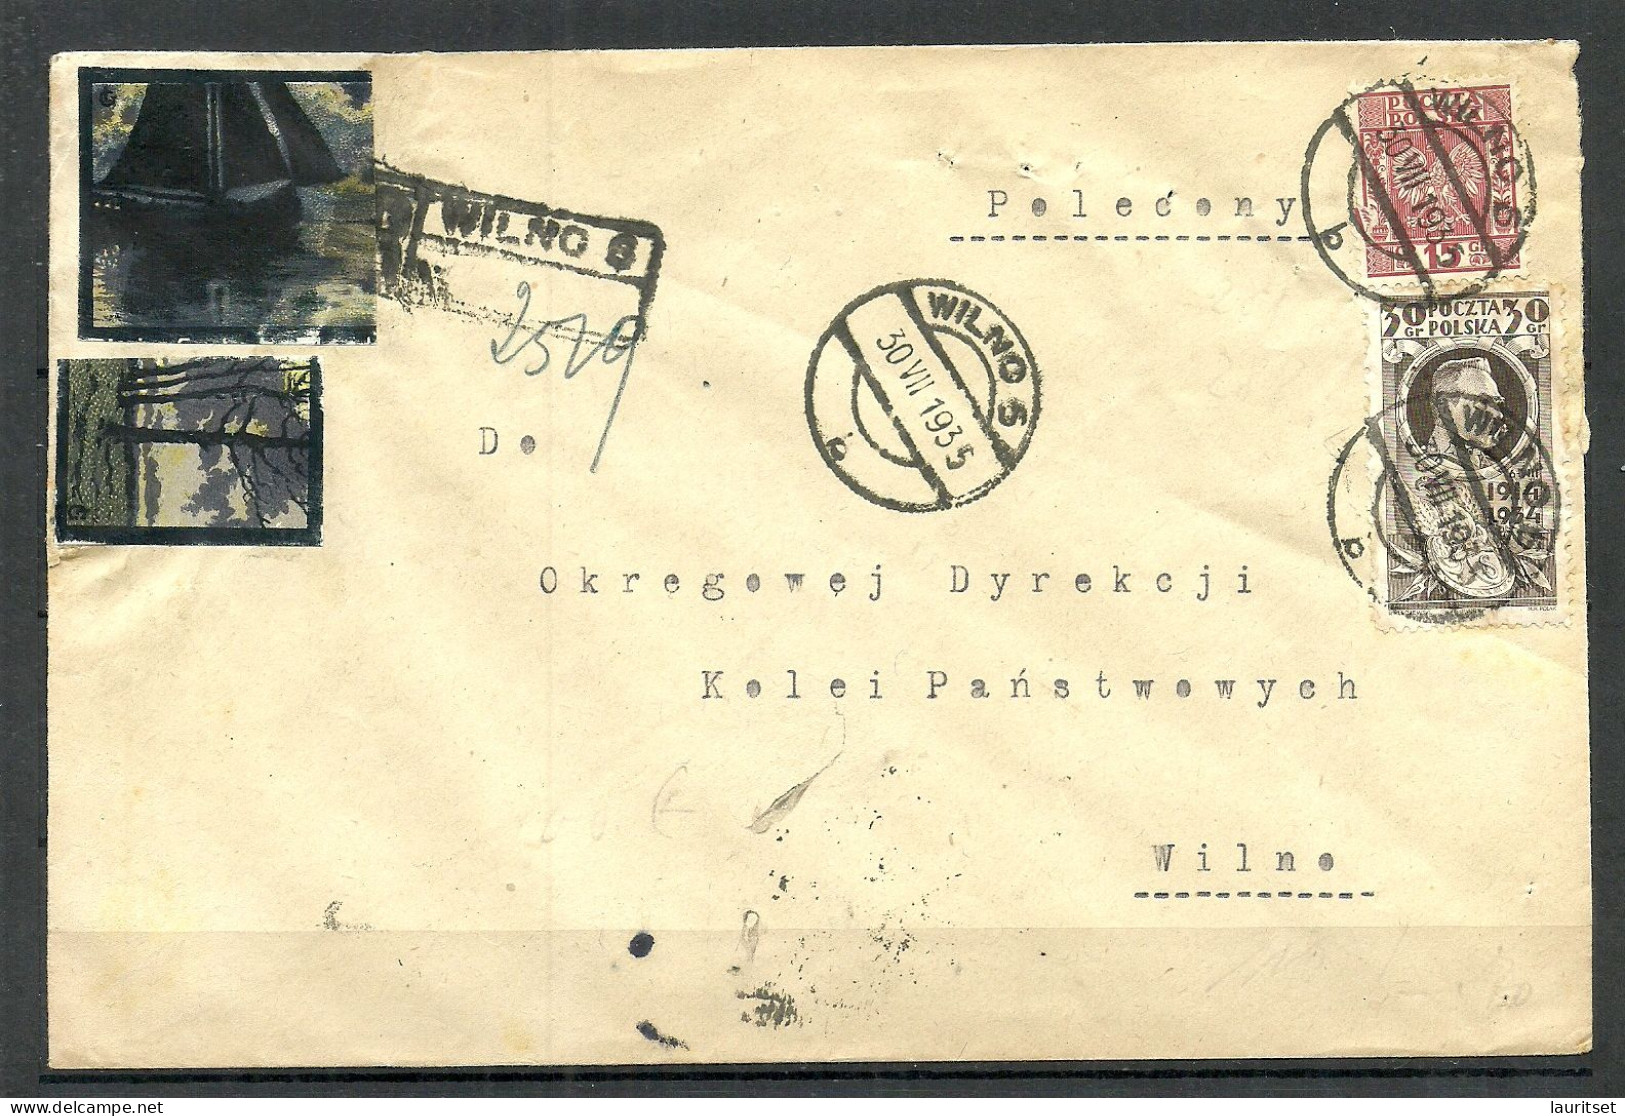 POLEN Poland (now Lithuania) 1935 O WILNO (Vilnius) Registered Cover With Interesting Cinderellas/vignettes - Covers & Documents